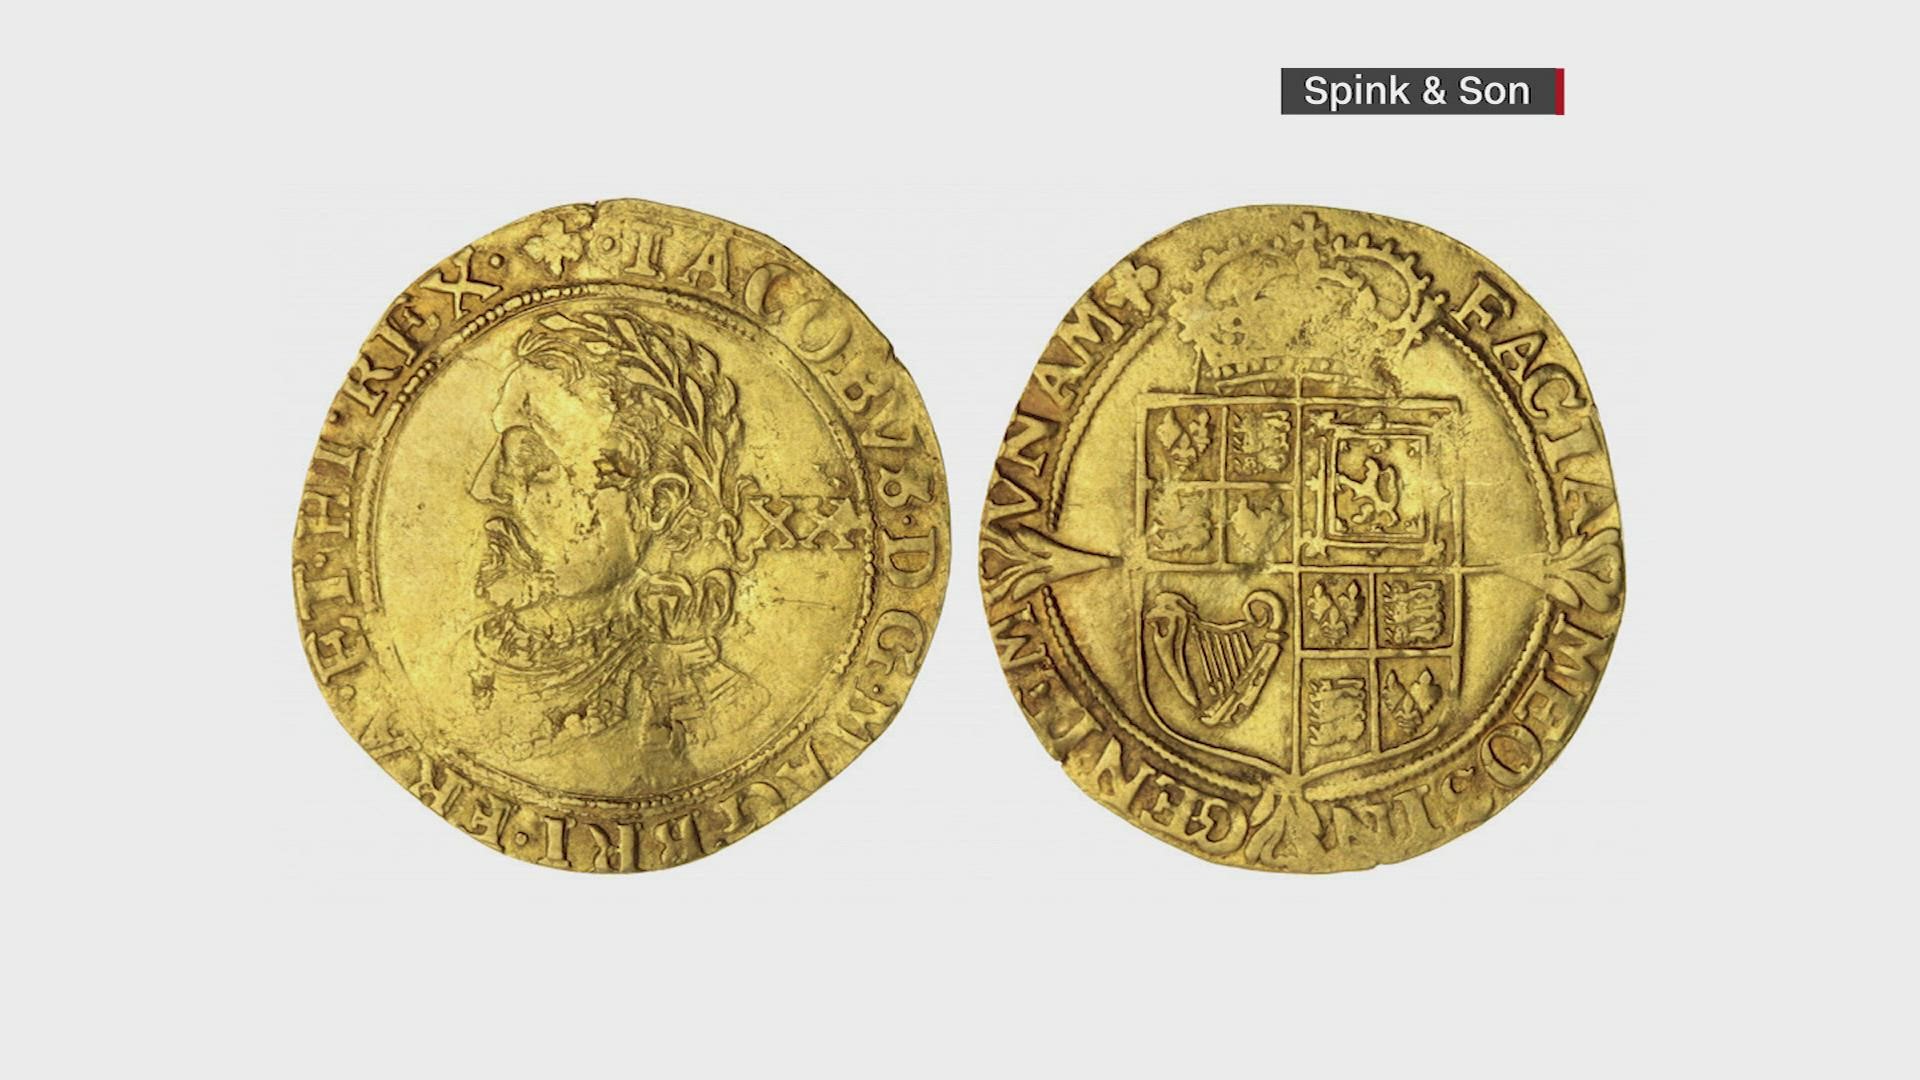 An English household found nearly $300,000 worth of gold coins from centuries ago.